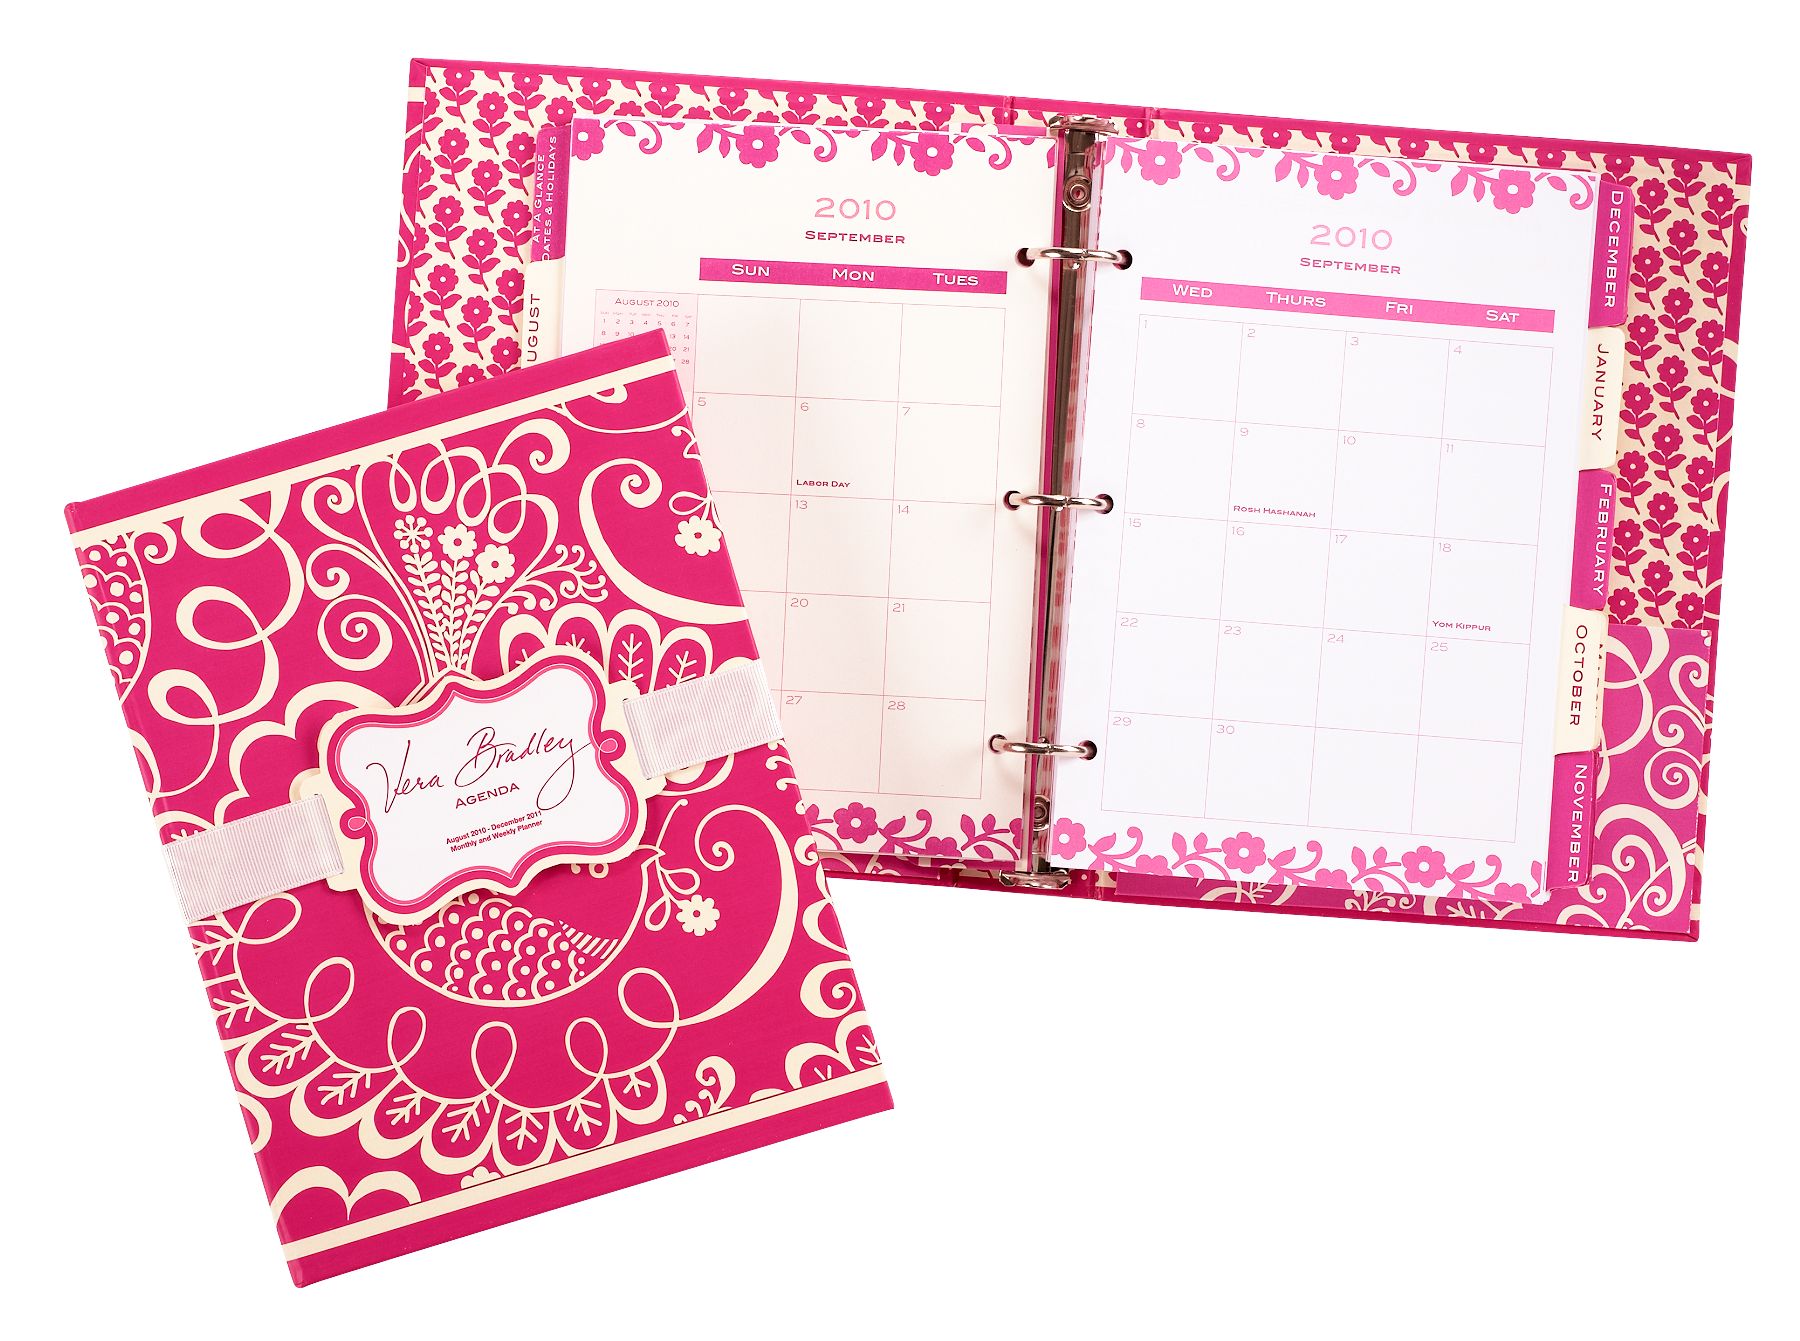 Vera Bradley agenda. We all love our Lilly Pulitzer agendas but these ...